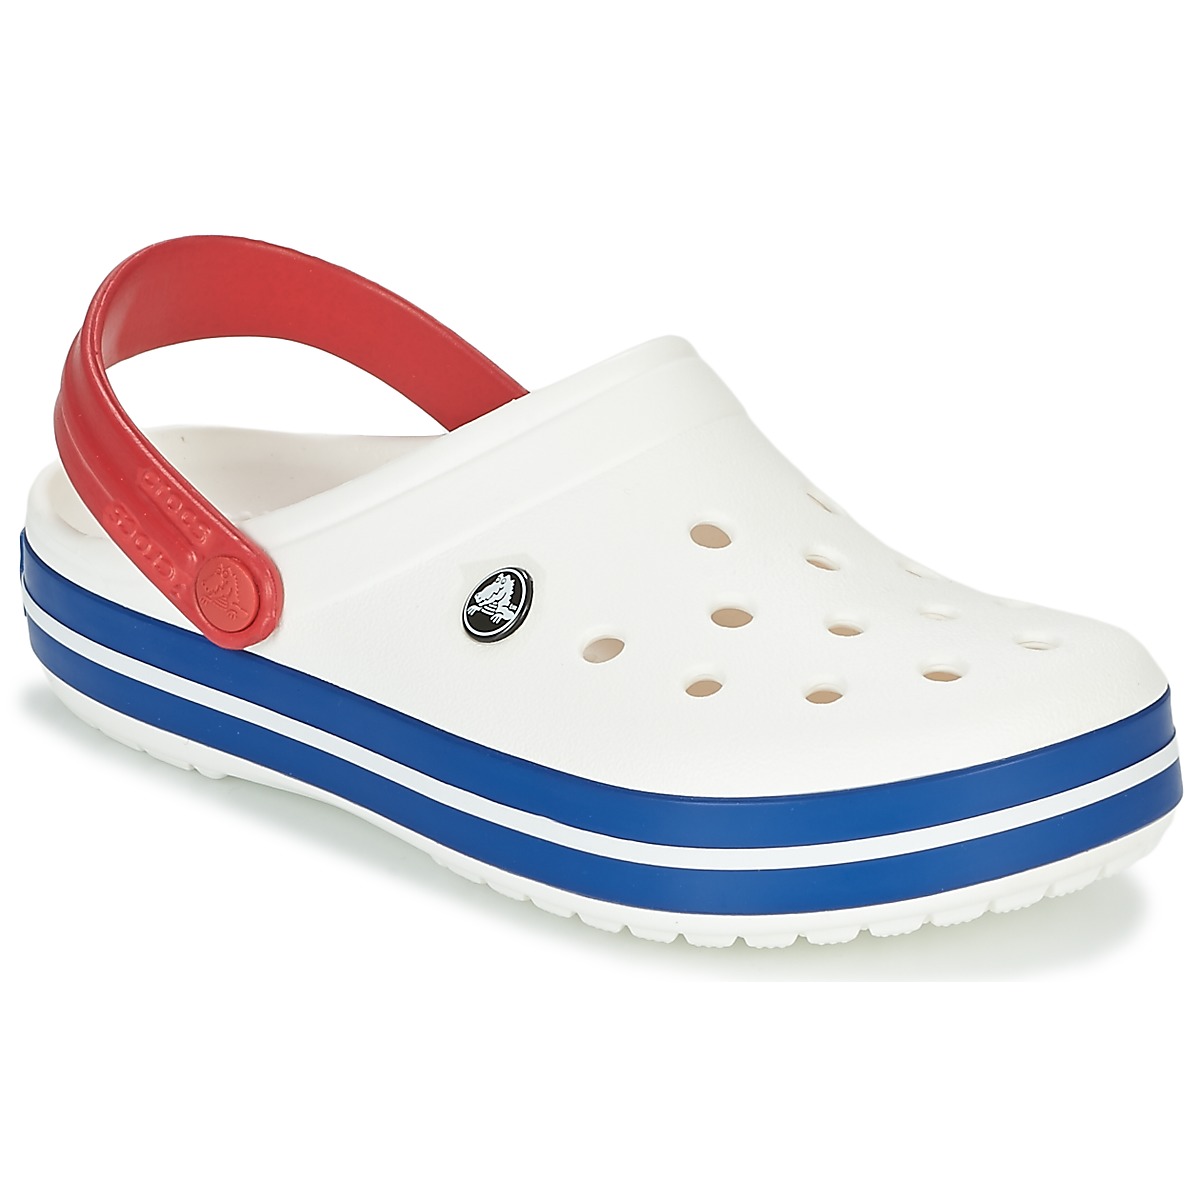 Crocs CROCBAND White / Blue ! | Free Shoes Clogs Red - Spartoo delivery / - NET